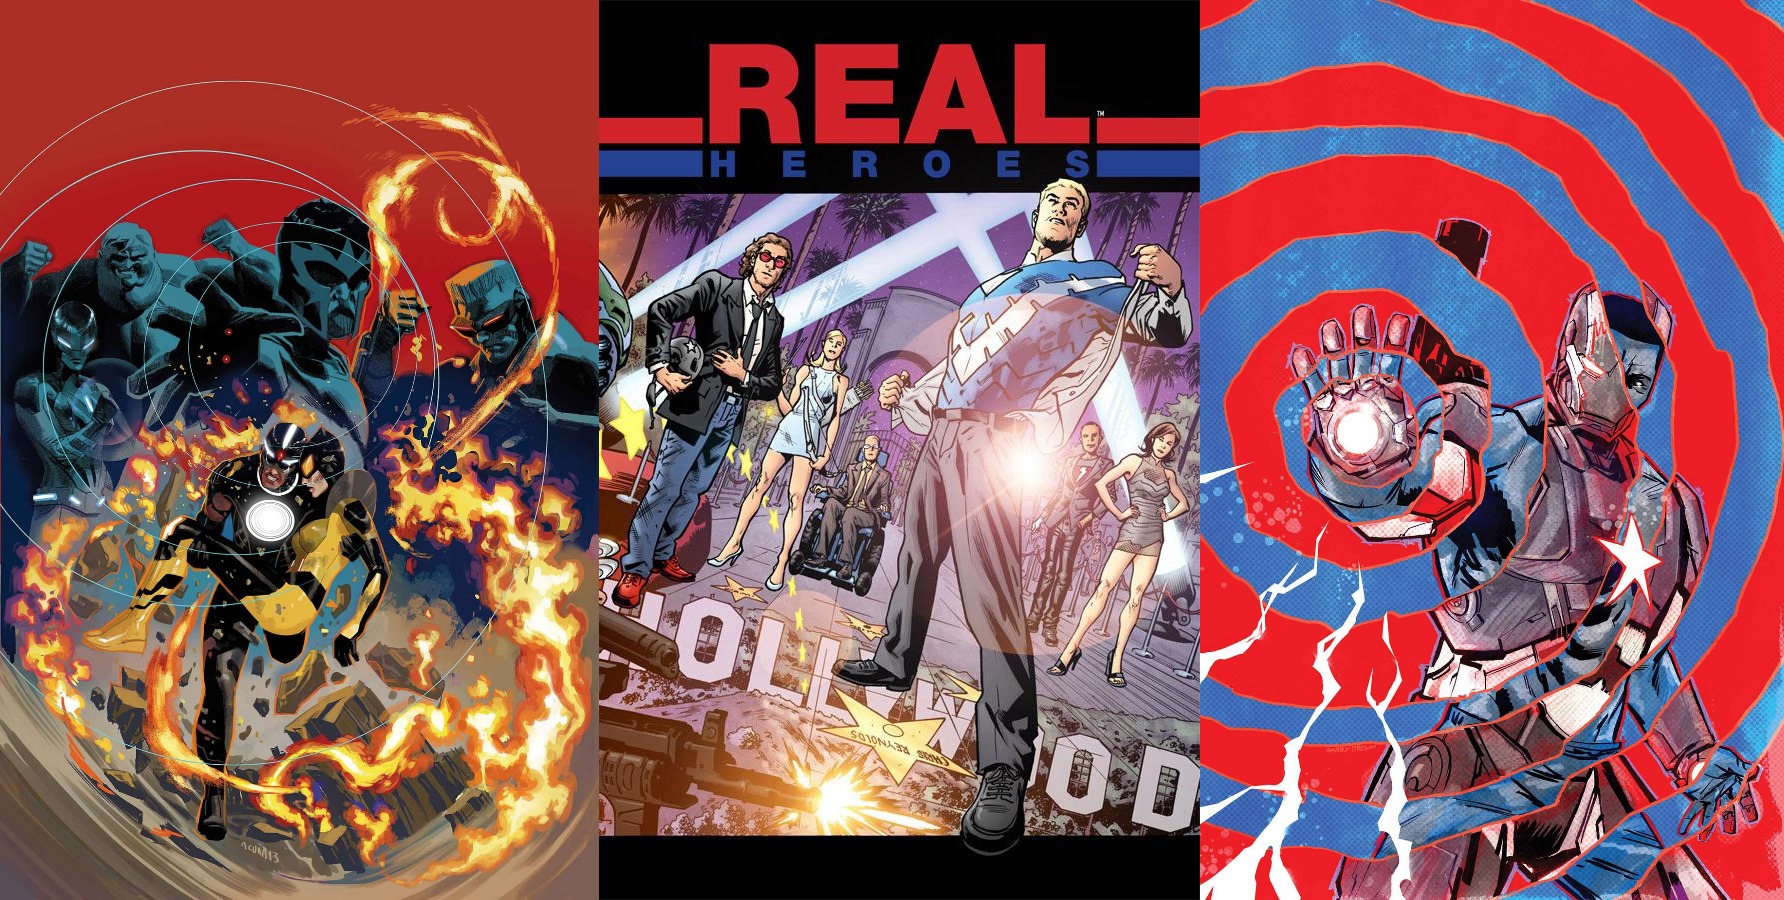 REAL HEROES / UNCANNY AVENGERS / IRON PATRIOT [Reviews]: Not Such a 'Party in the USA'